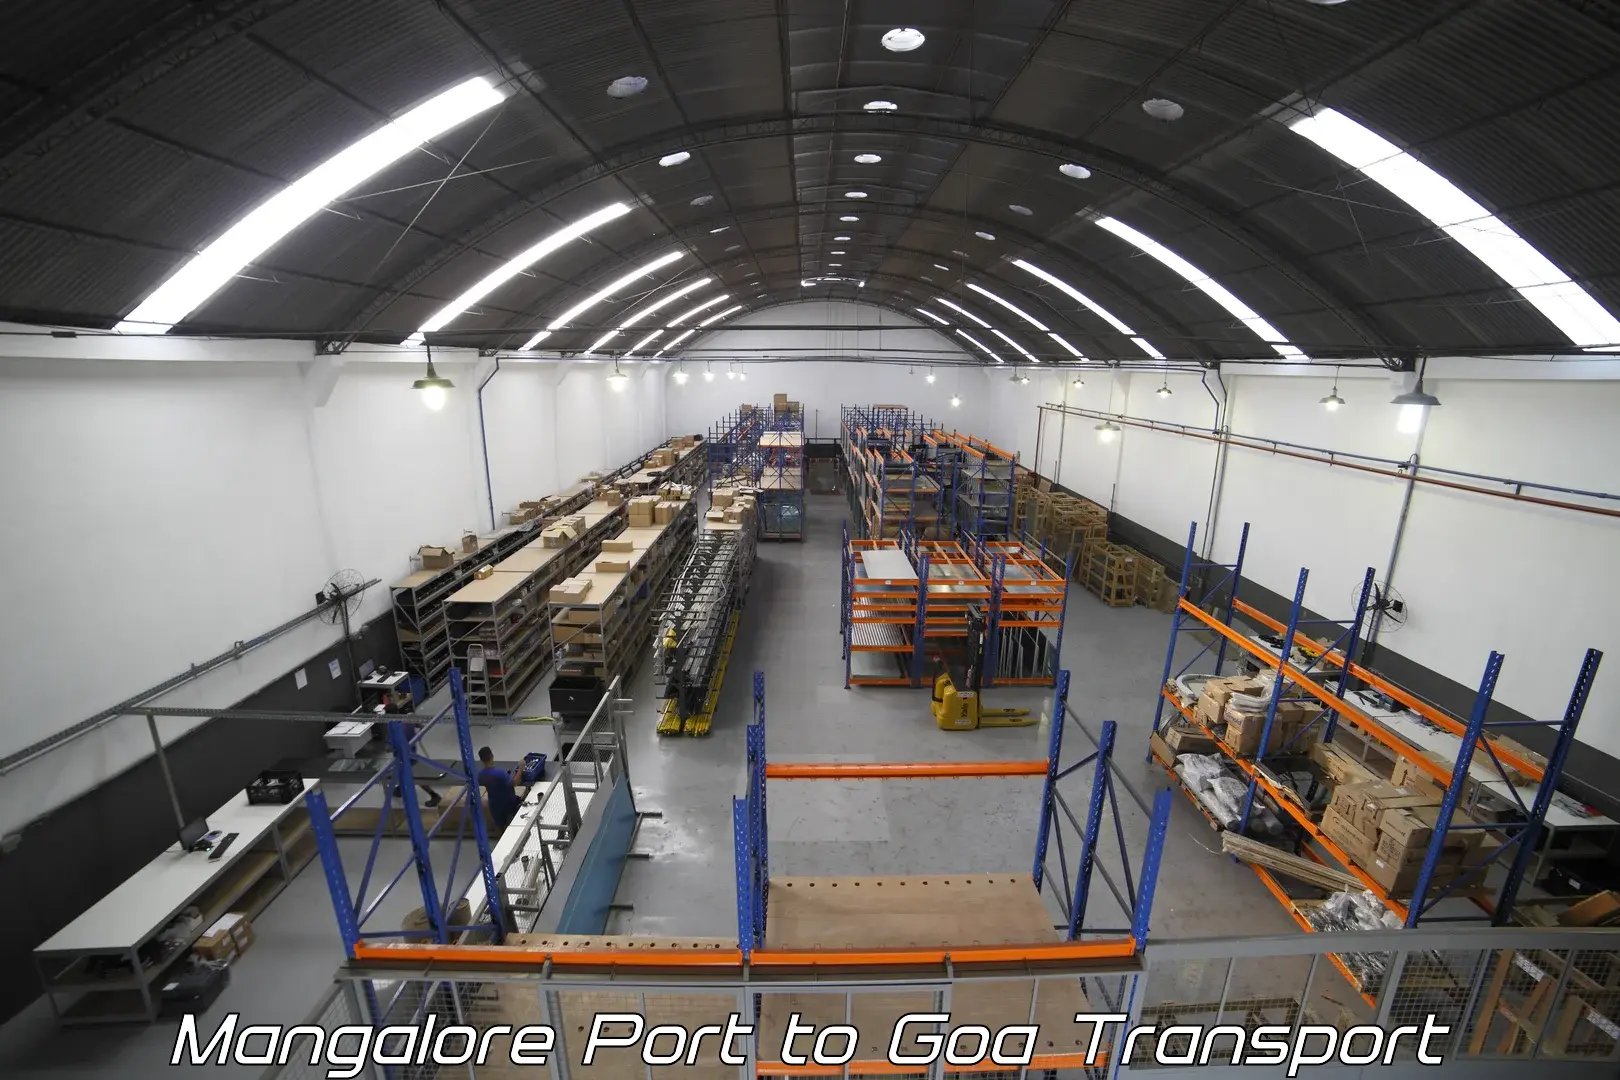 Transport shared services Mangalore Port to South Goa